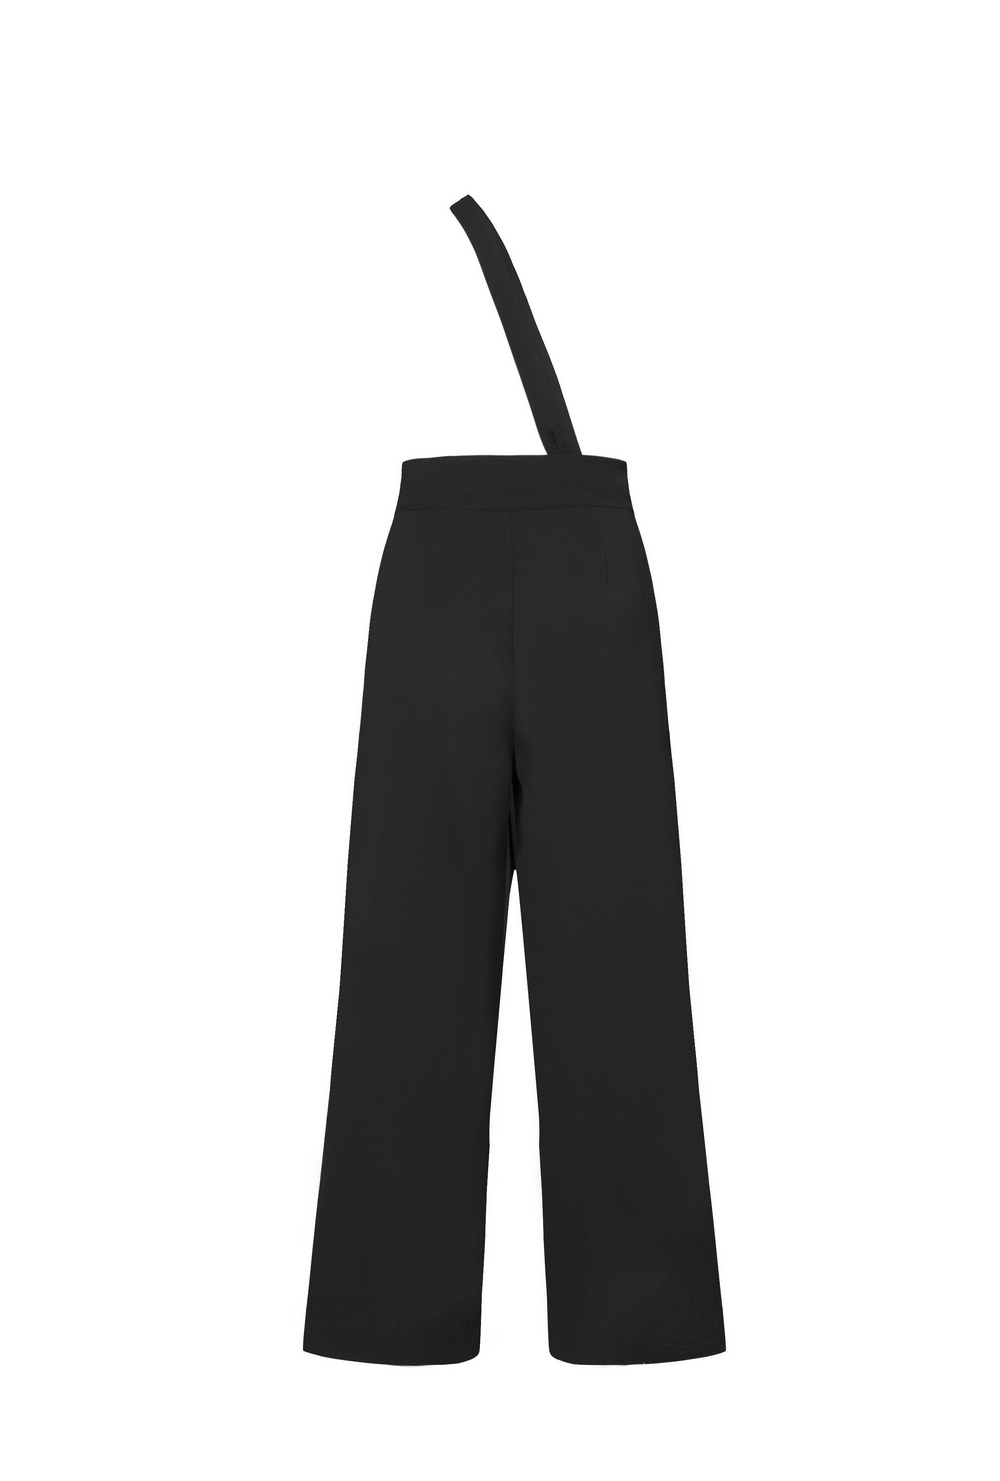 Avant Garde Black High-Waisted Wide Leg Pants with Mesh Accents